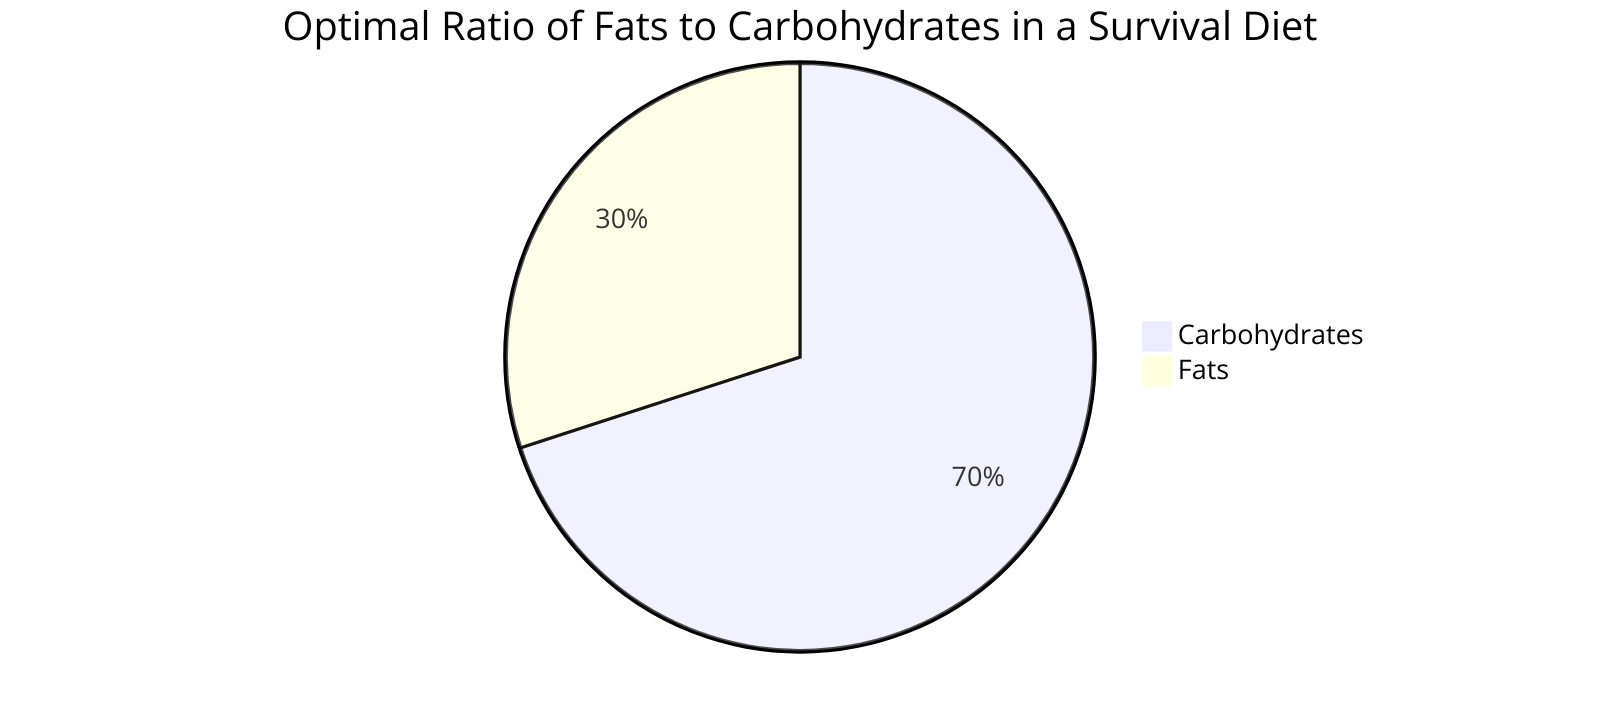 the optimal ratio of fats to carbohydrates in a survival diet